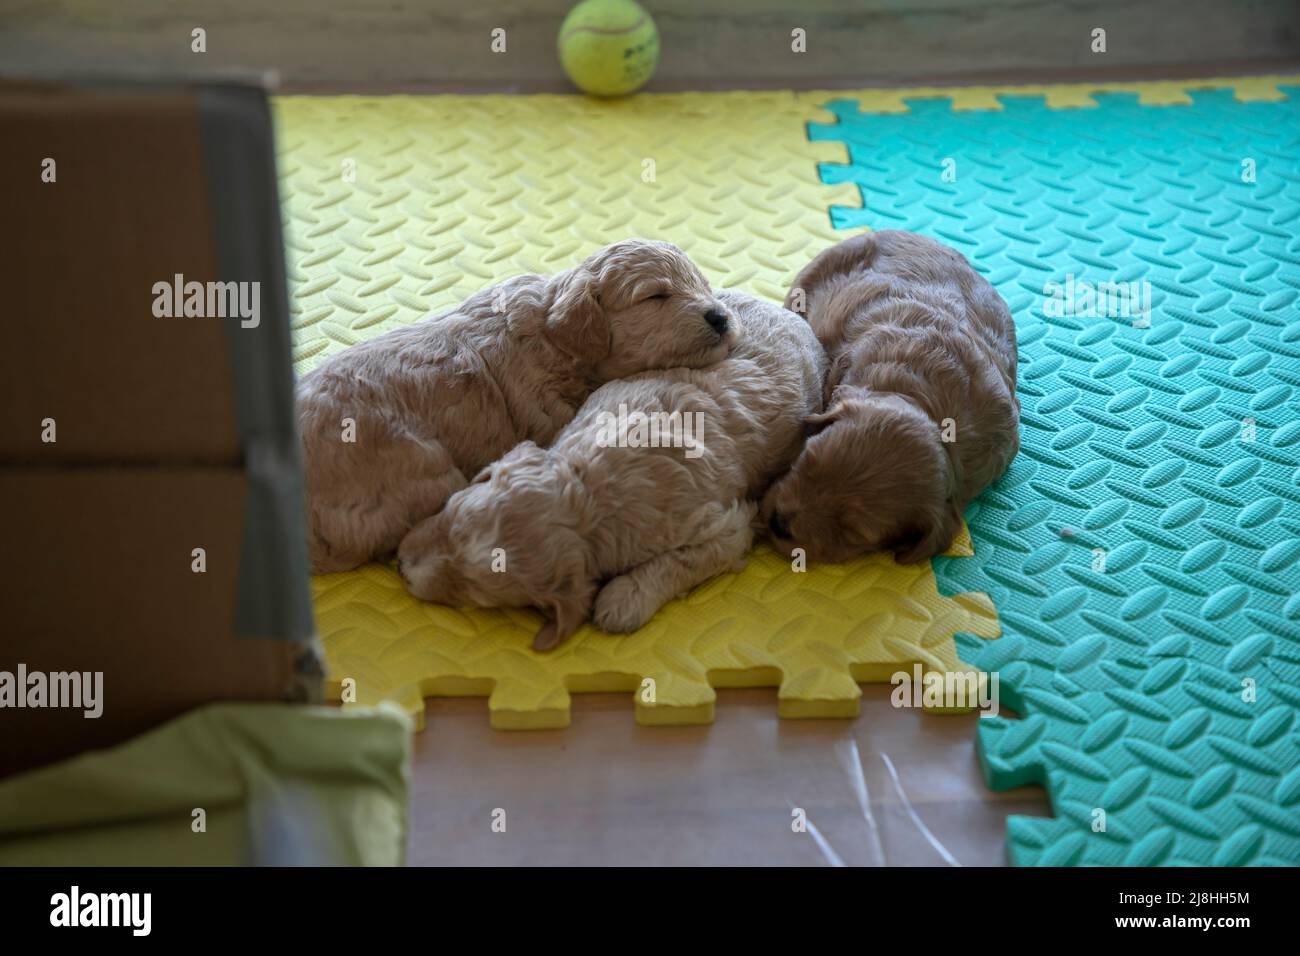 Close-up of 3-week-old Poochon (Poodle & Bichon mix) puppies sleeping in a whelping box Stock Photo